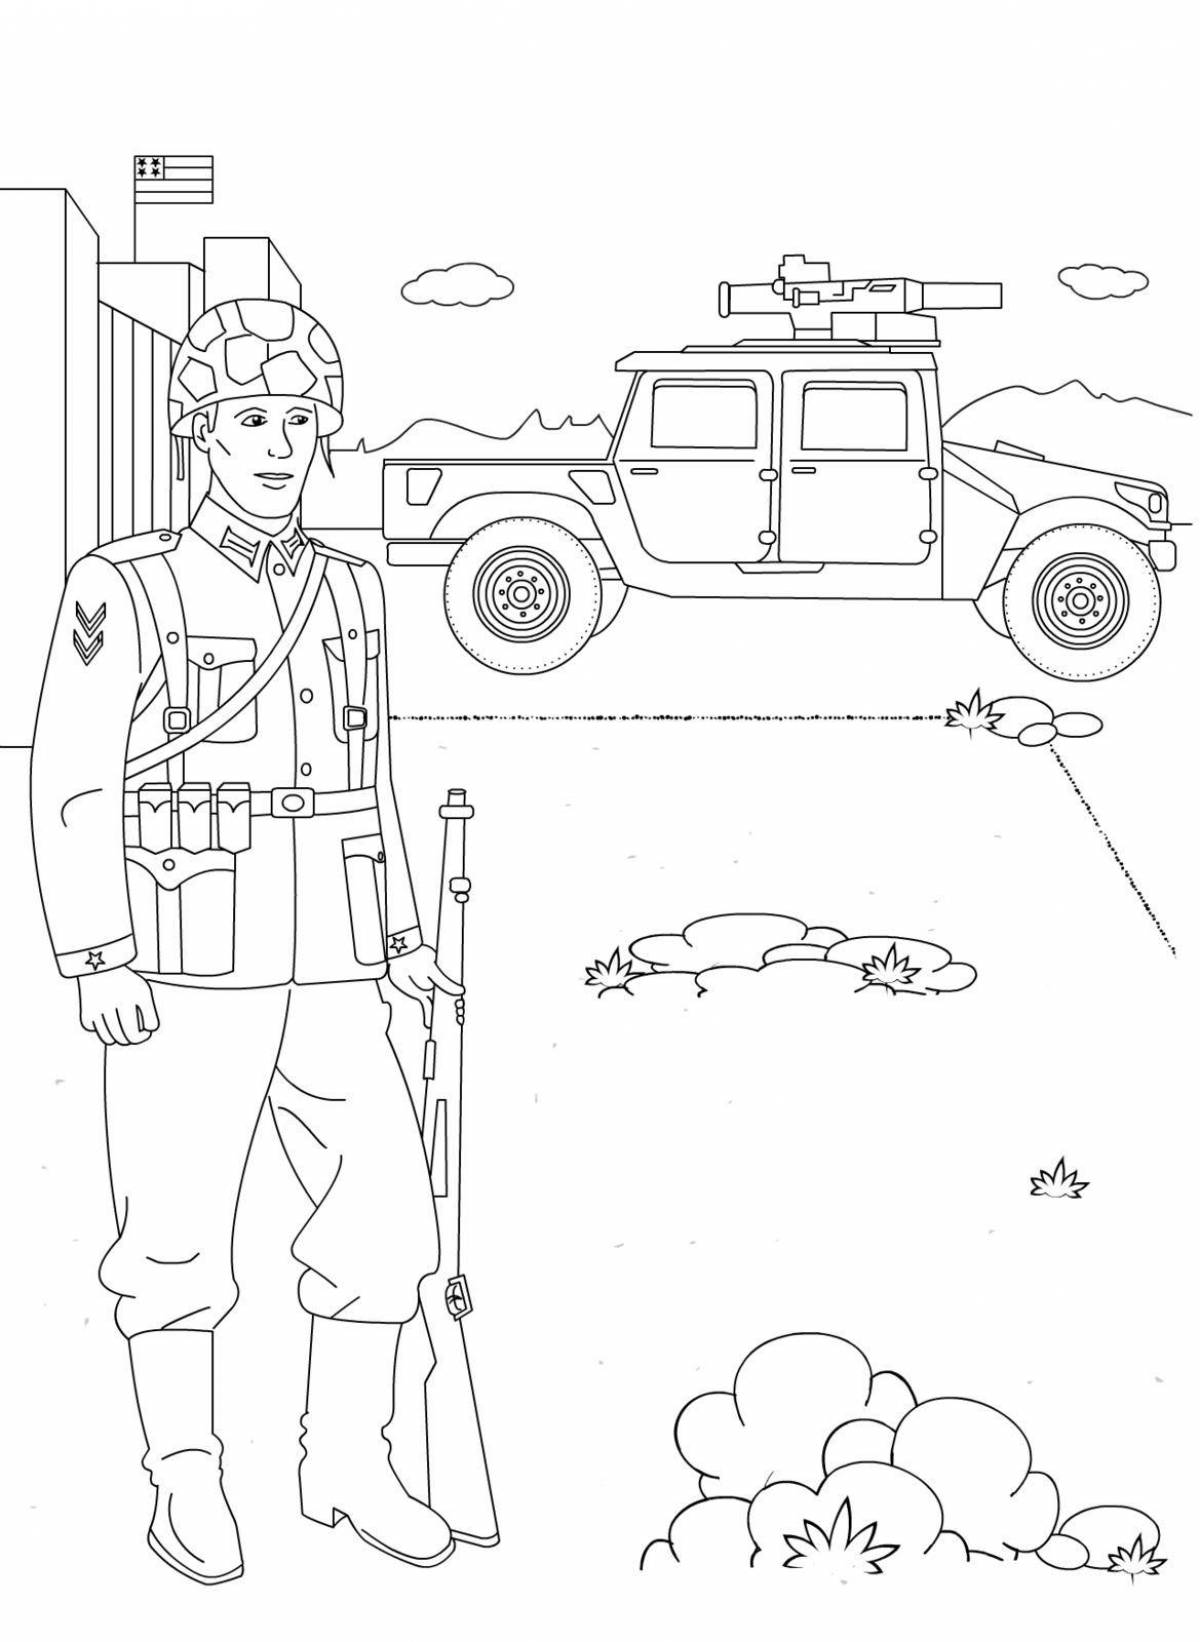 A funny coloring book about the military profession for children 3-4 years old